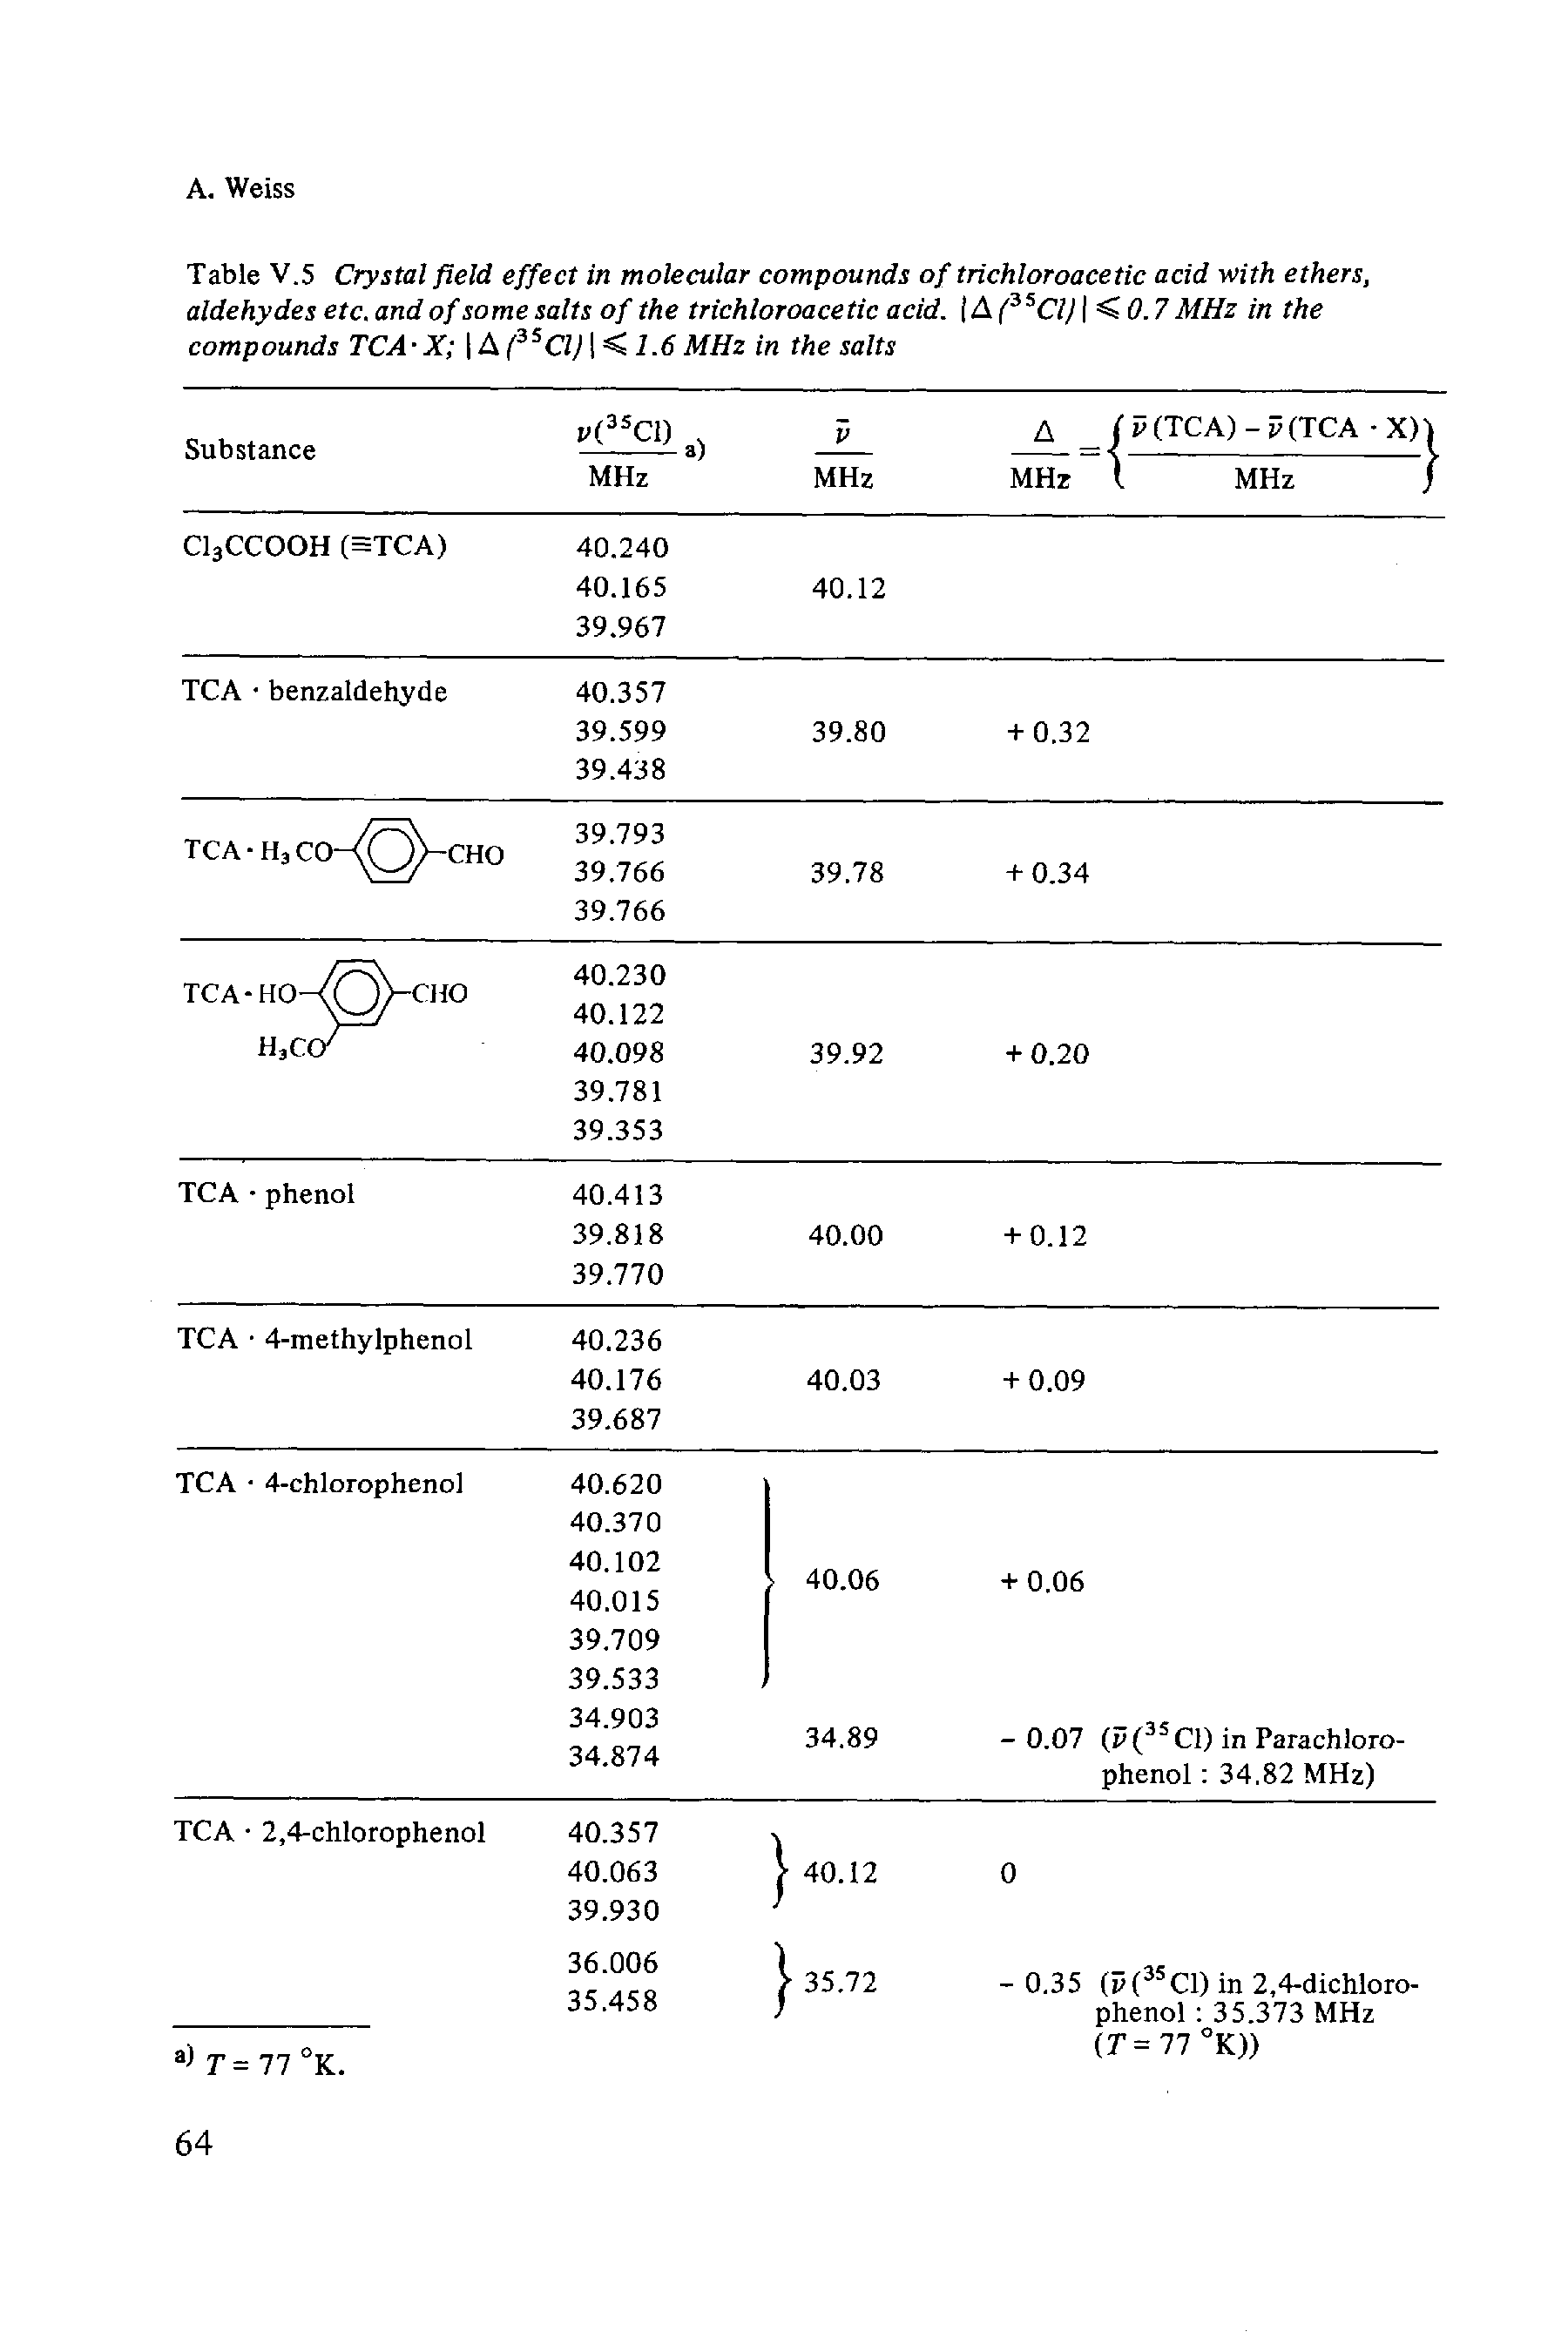 Table V.5 Crystal field effect in molecular compounds of trichloroacetic acid with ethers, aldehydes etc.and of some salts of the trichloroacetic acid. A( SC1) <0.7 MHz in the compounds TCA-X A (3SC1) K 1.6 MHz in the salts...